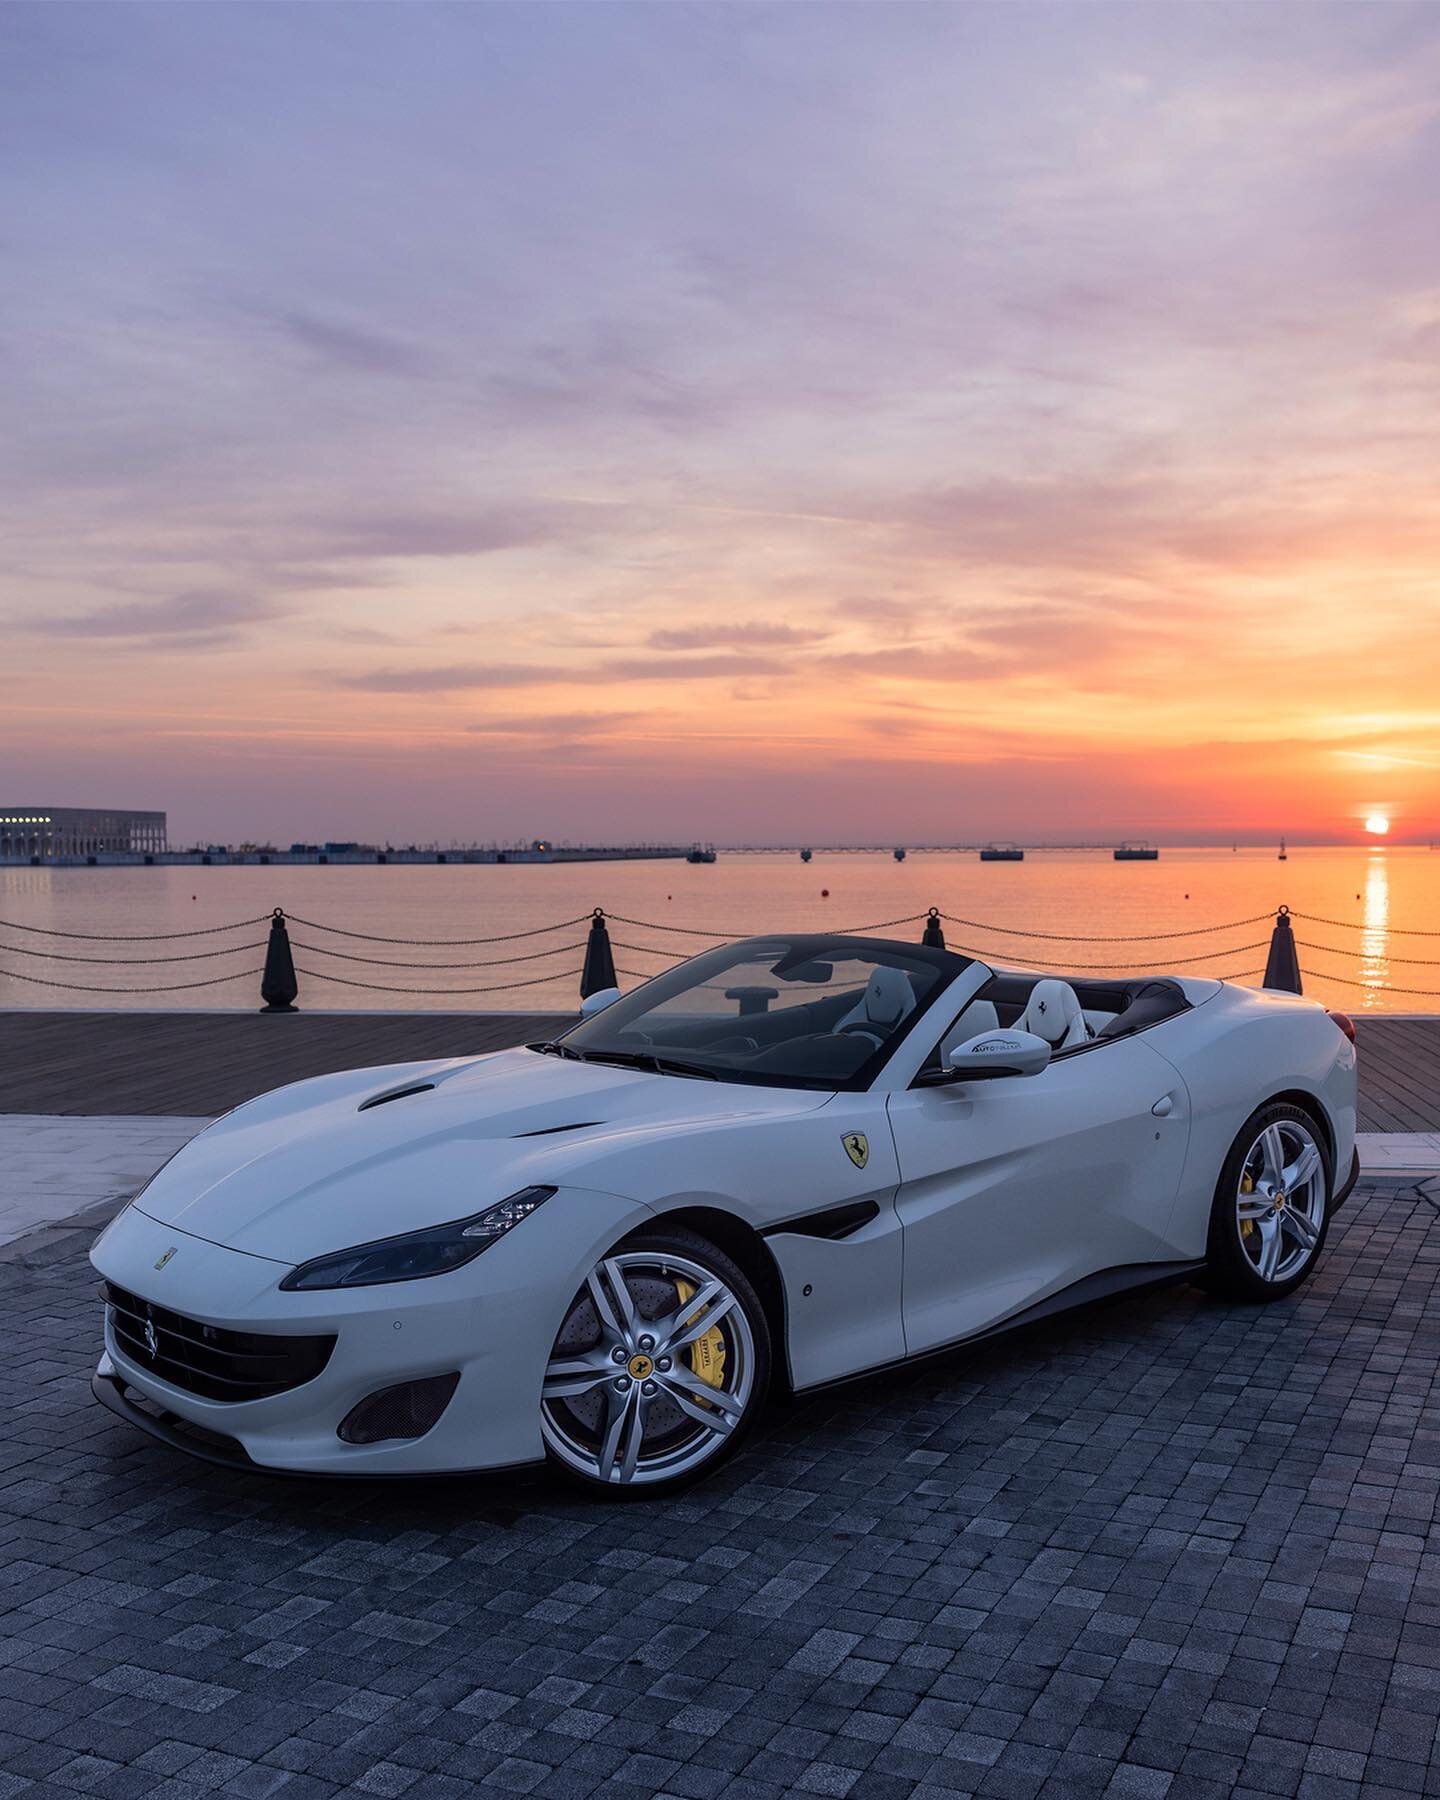 What a magical morning! The Ferrari Portofino melts so good in this surrounding. The sound out of this TwinTurbo V8 sounds like a V12. More photos and a detailed YouTube video to follow.

Thanks to our friends @knightsbridgeqatar for hooking us up wi